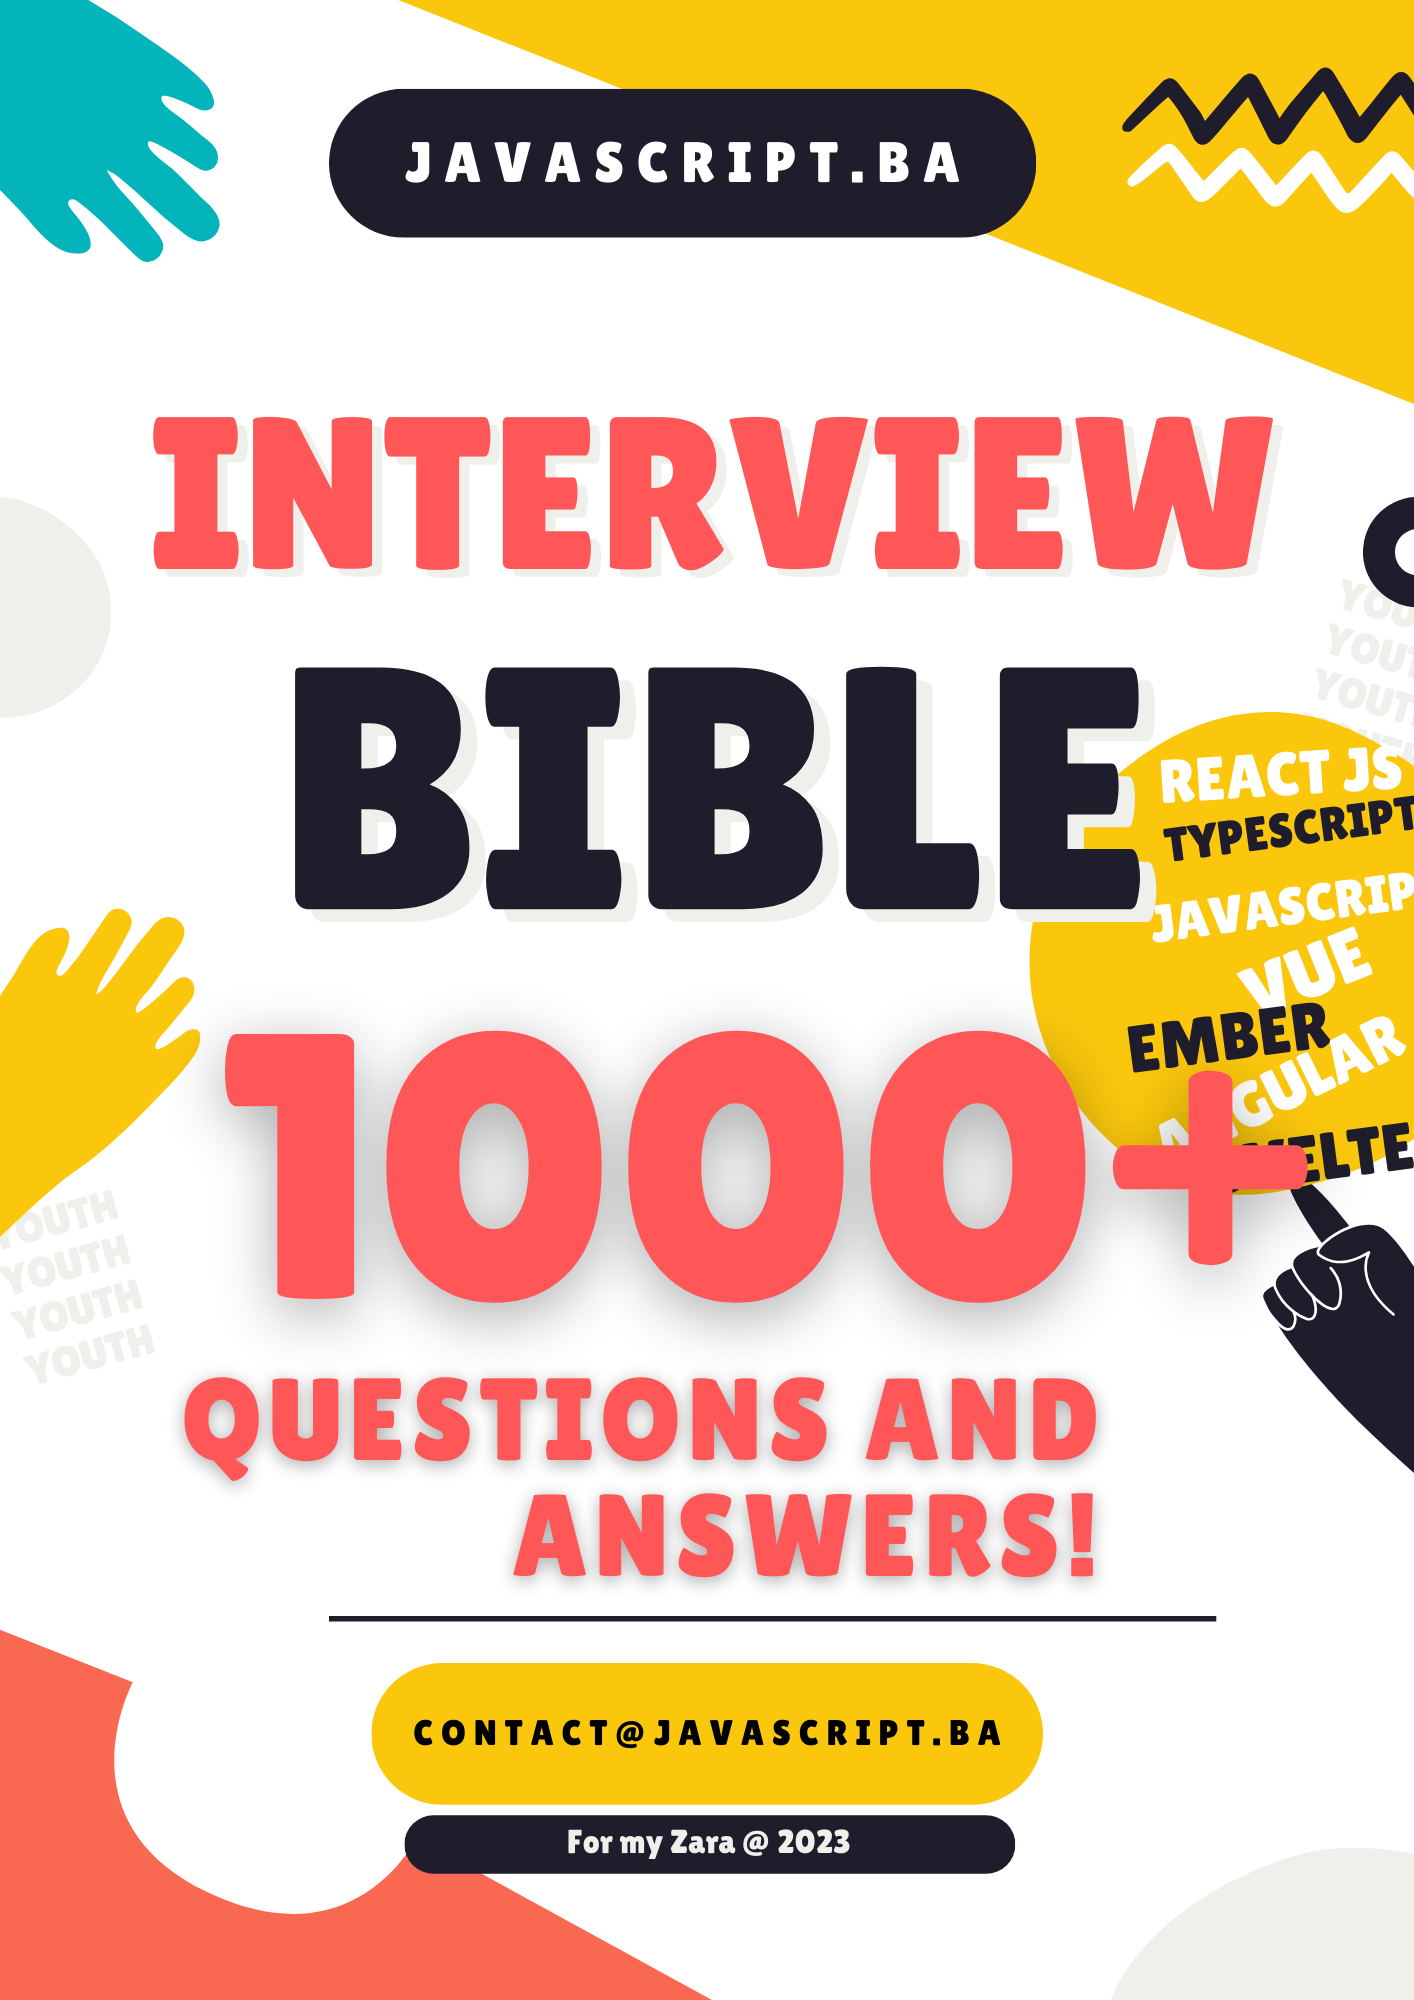 The JavaScript Interview Bible - A Comprehensive Guide with 1000+ Essential Questions and Answers!